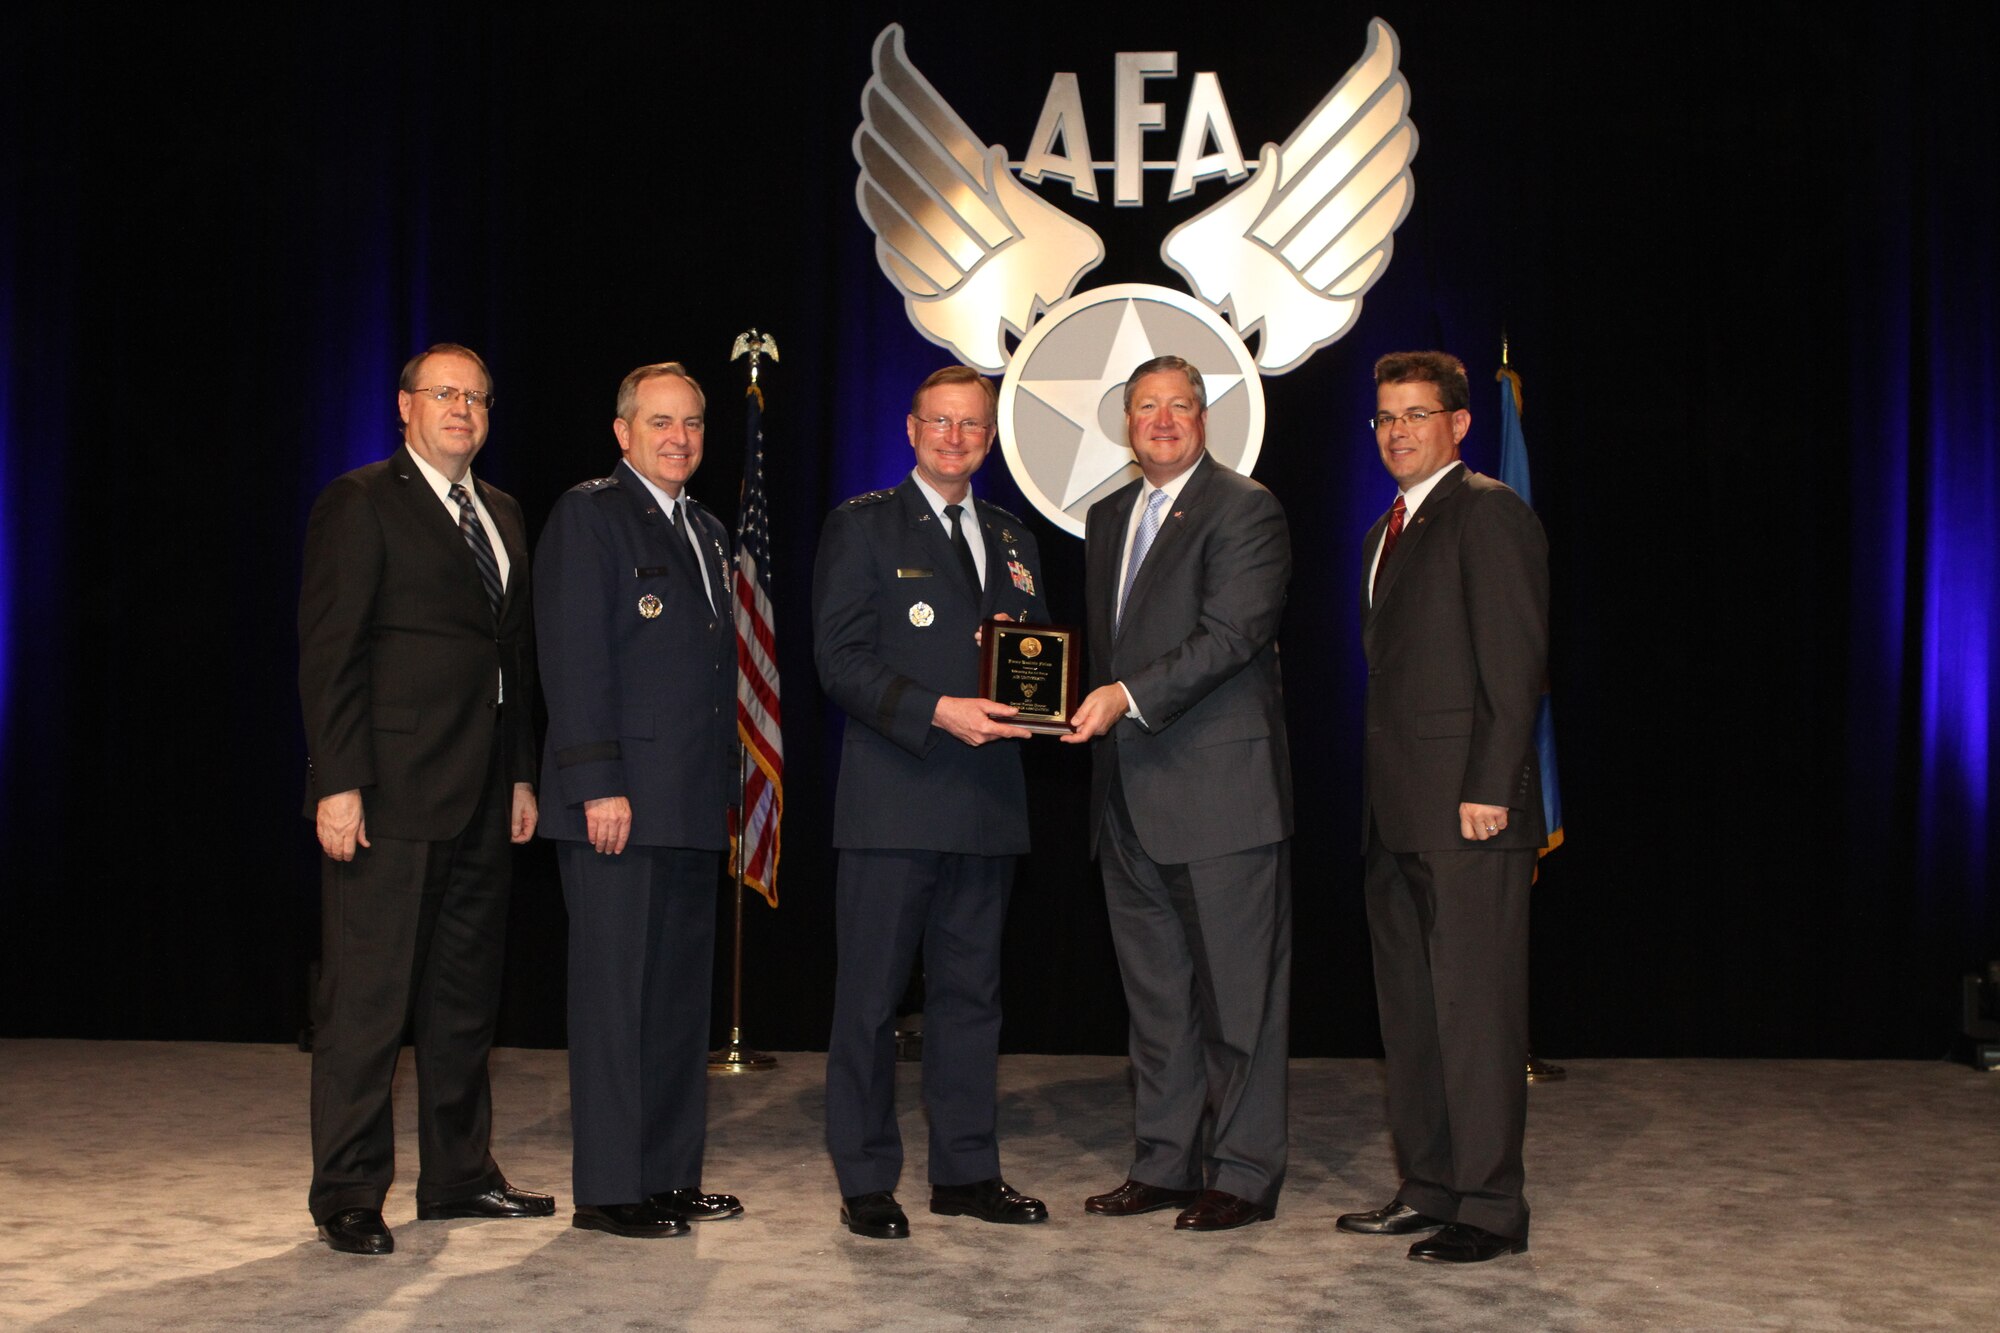 Secretary of the Air Force Michael B. Donley, along with Chief of Staff of the Air Force Gen. Mark A. Welsh III, AFA Central Florida Chapter President Michael Liquori and Air Force Gala Chairman Tim Brock, presents the Jimmy Doolittle Educational Fellow award to Air University Commander Lt. Gen. David S. Fadok. The award presentation was held during the Air Force Association Central Florida Chapter's Air Force Gala banquet in Orlando, Fla., Feb. 21. (Courtesy photo)